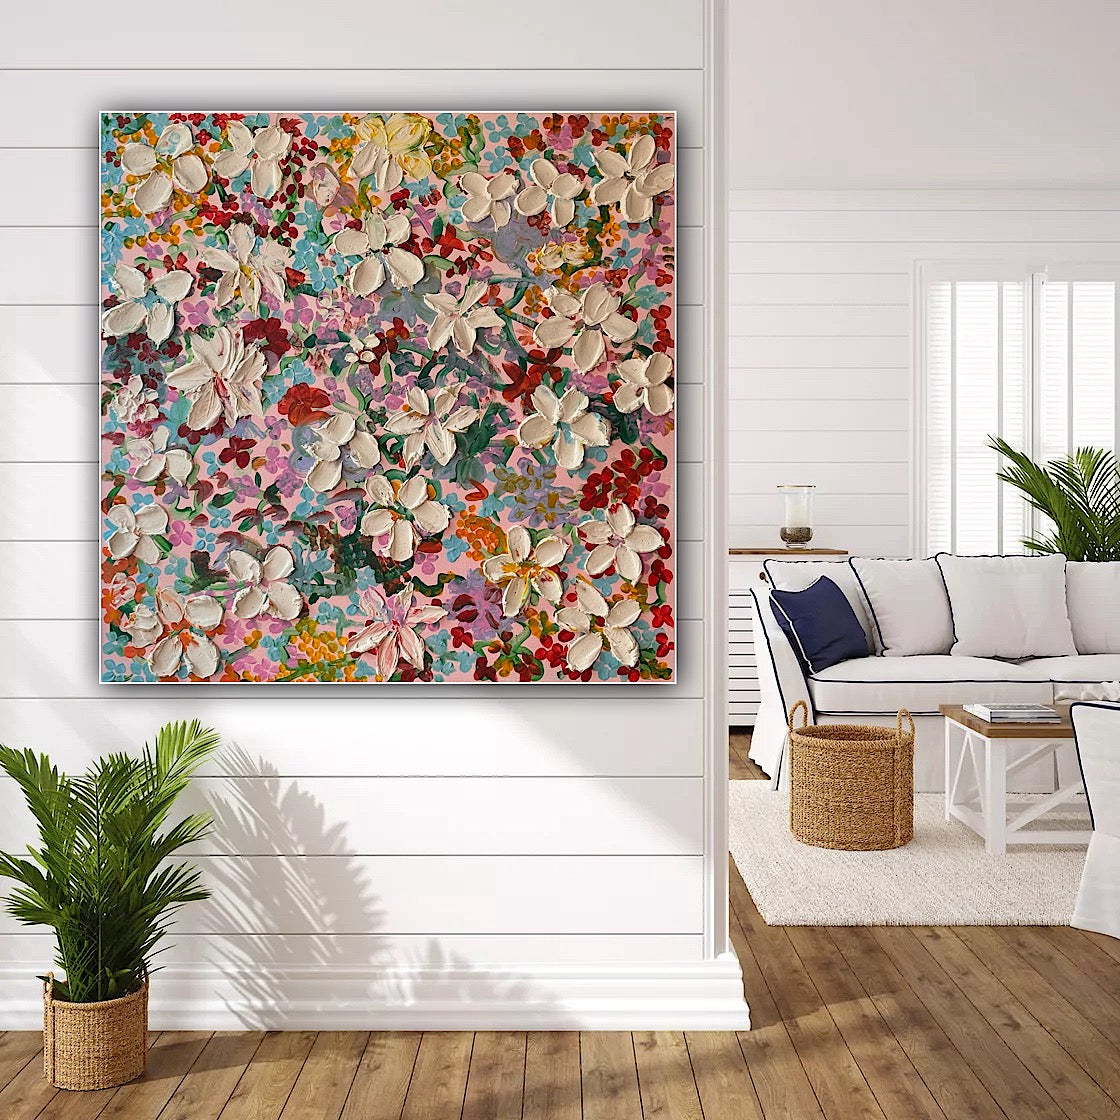 'Floral garden' original abstract oil painting on canvas from Sabina Swan Art